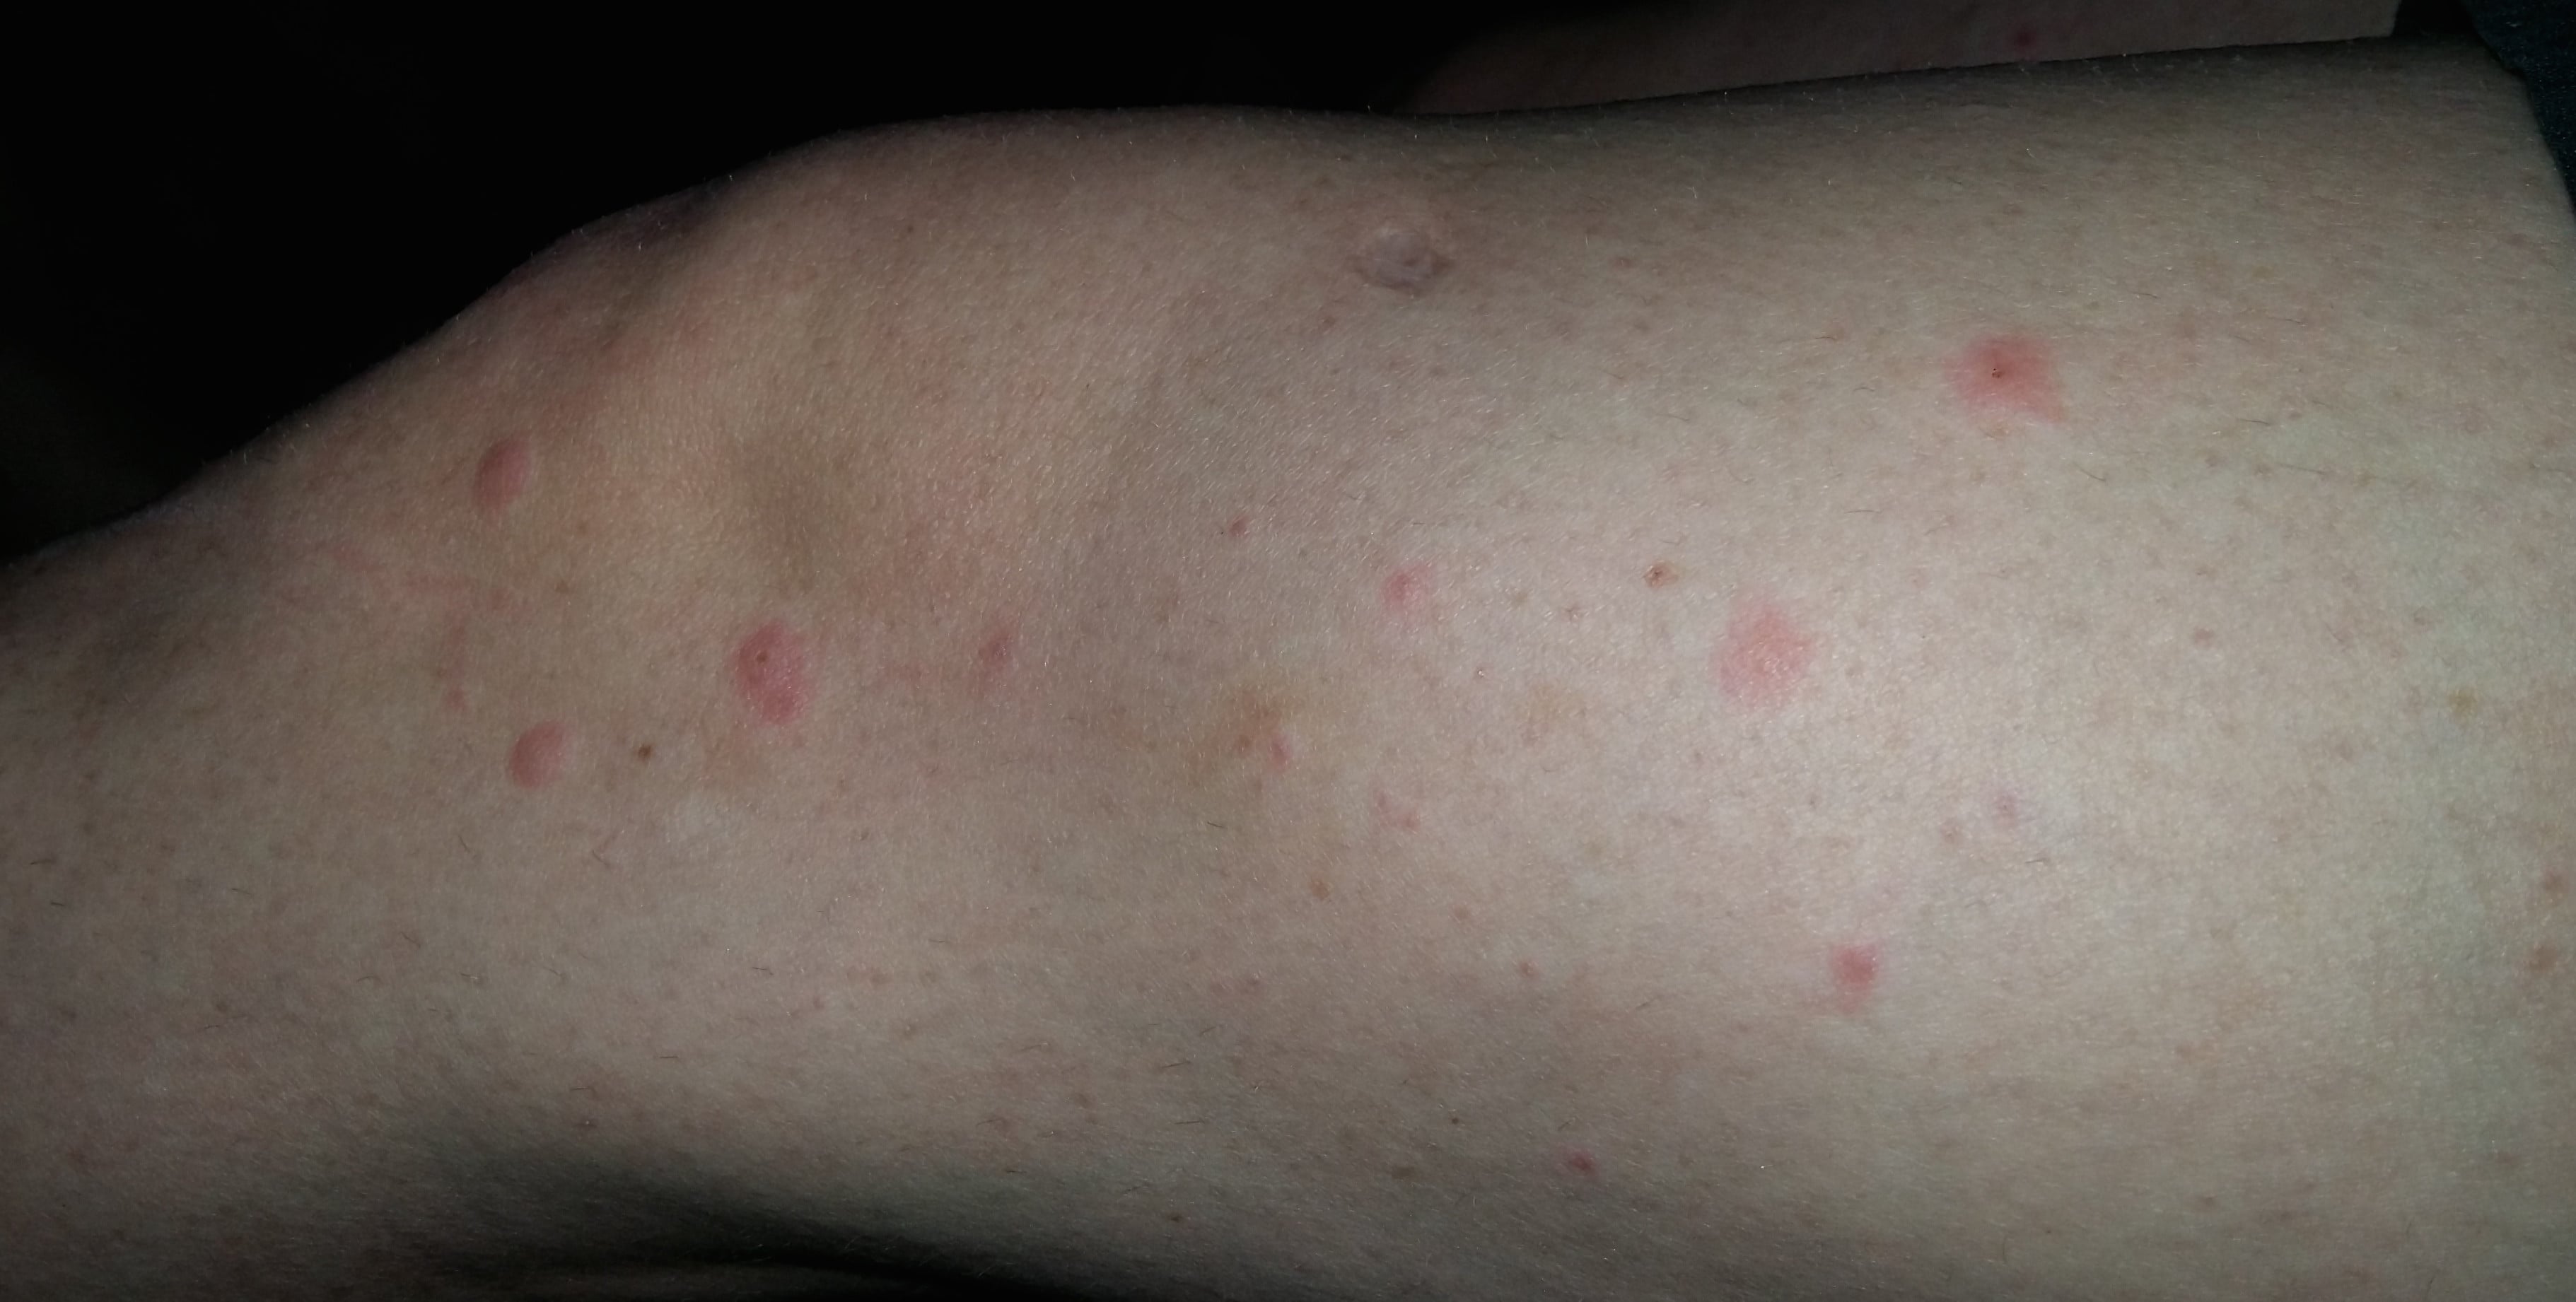 Close-up image showing what bed bug bites look like: itchy red bumps on a leg